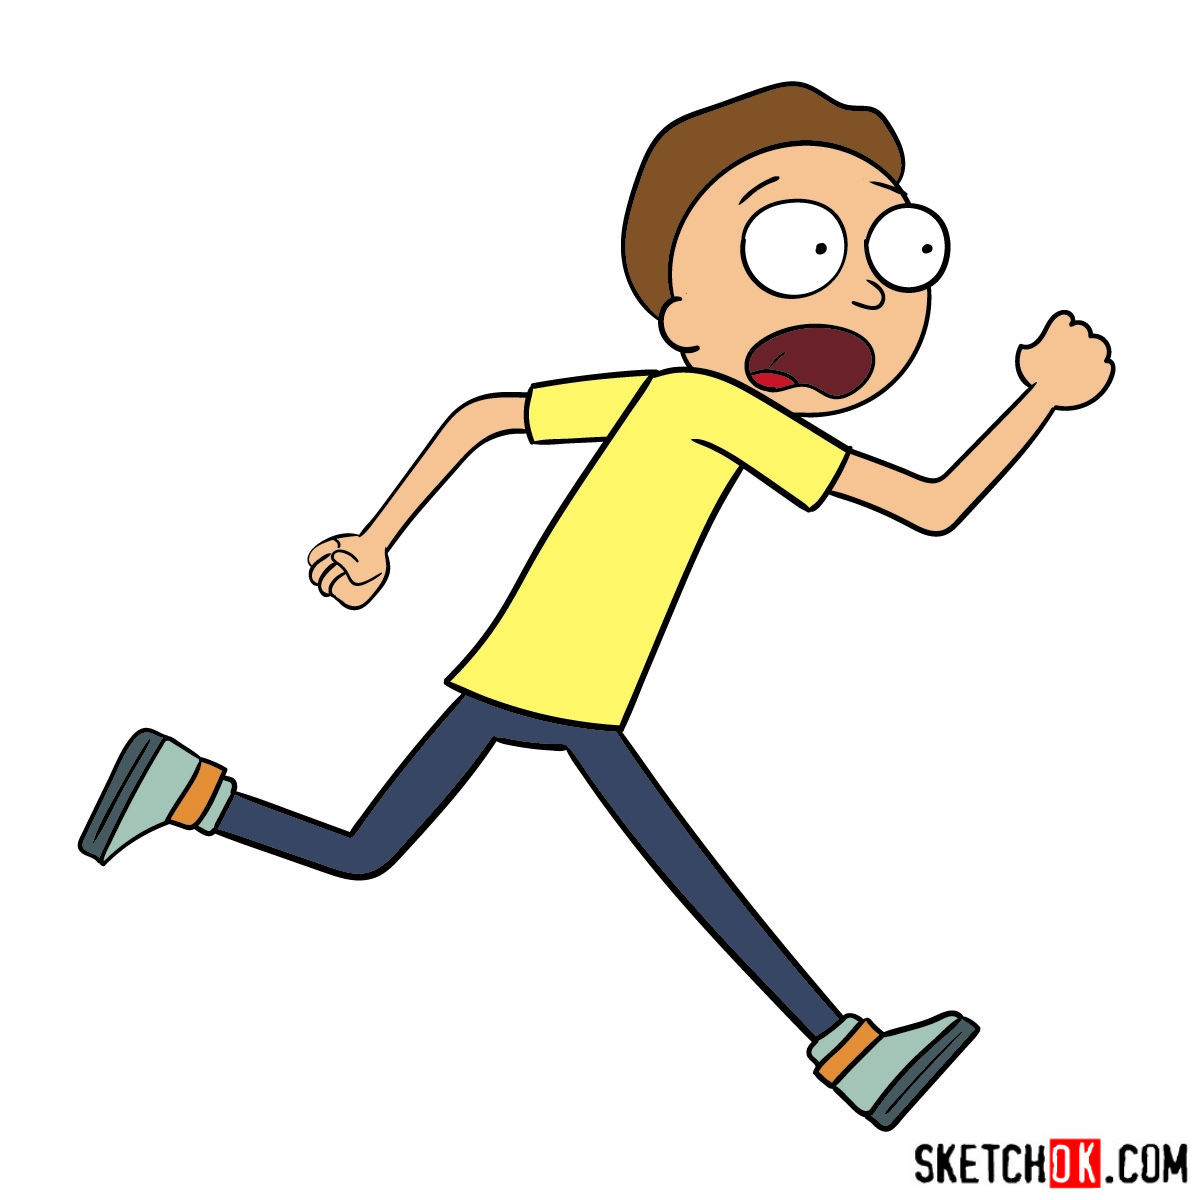 How to draw running Morty Smith (Rick and Morty) - Sketchok easy drawing  guides